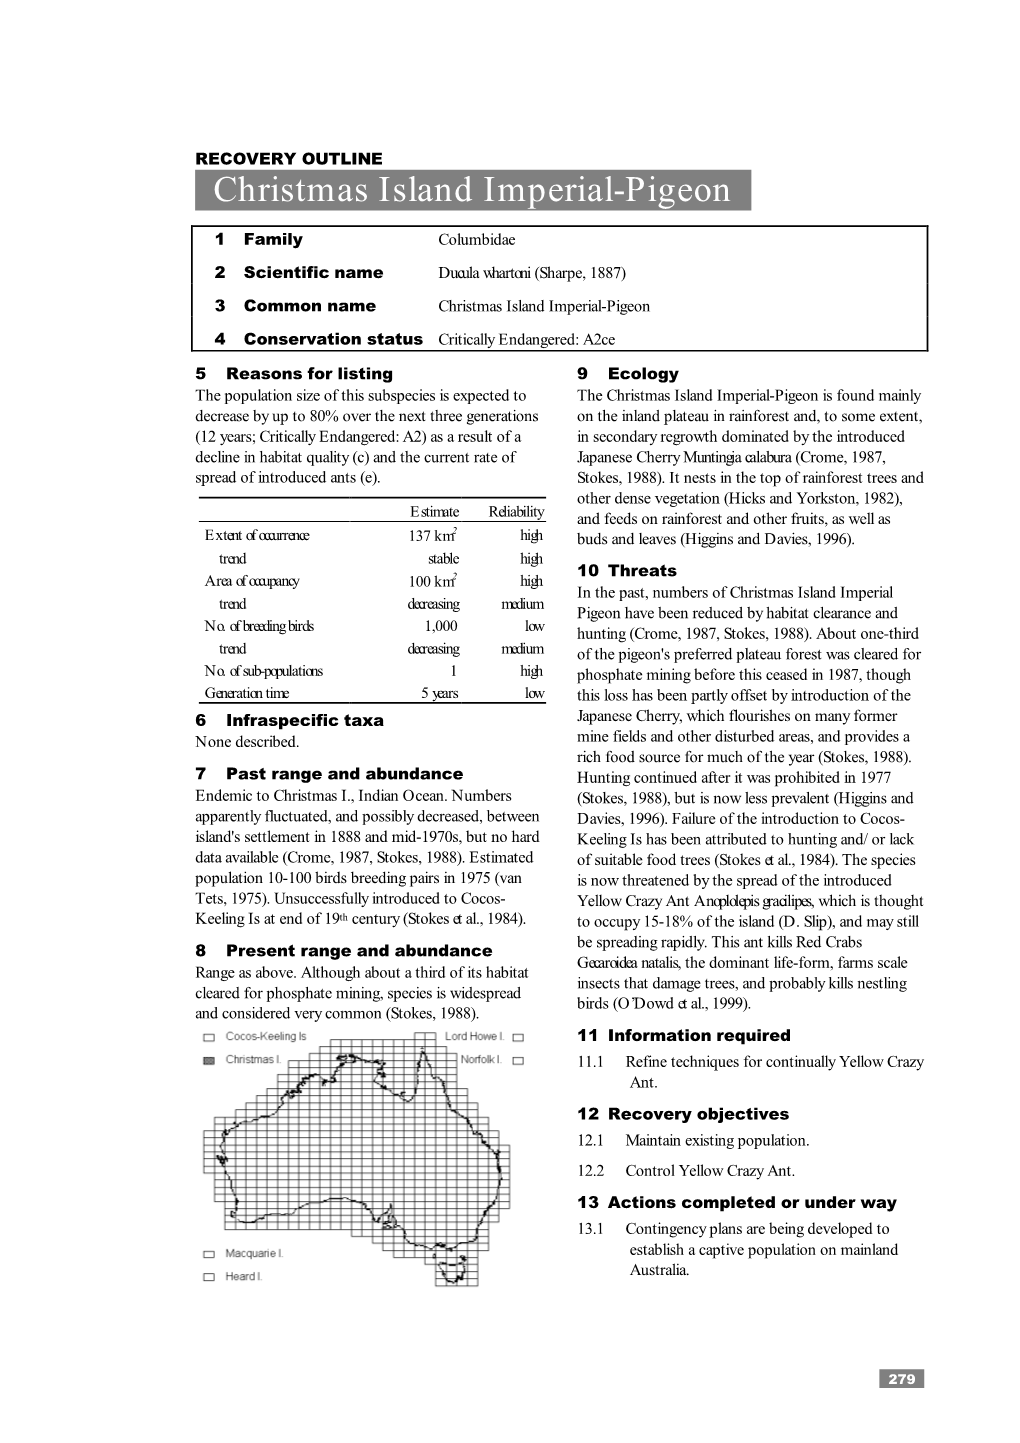 The Action Plan for Australian Birds 2000: Recovery Outline